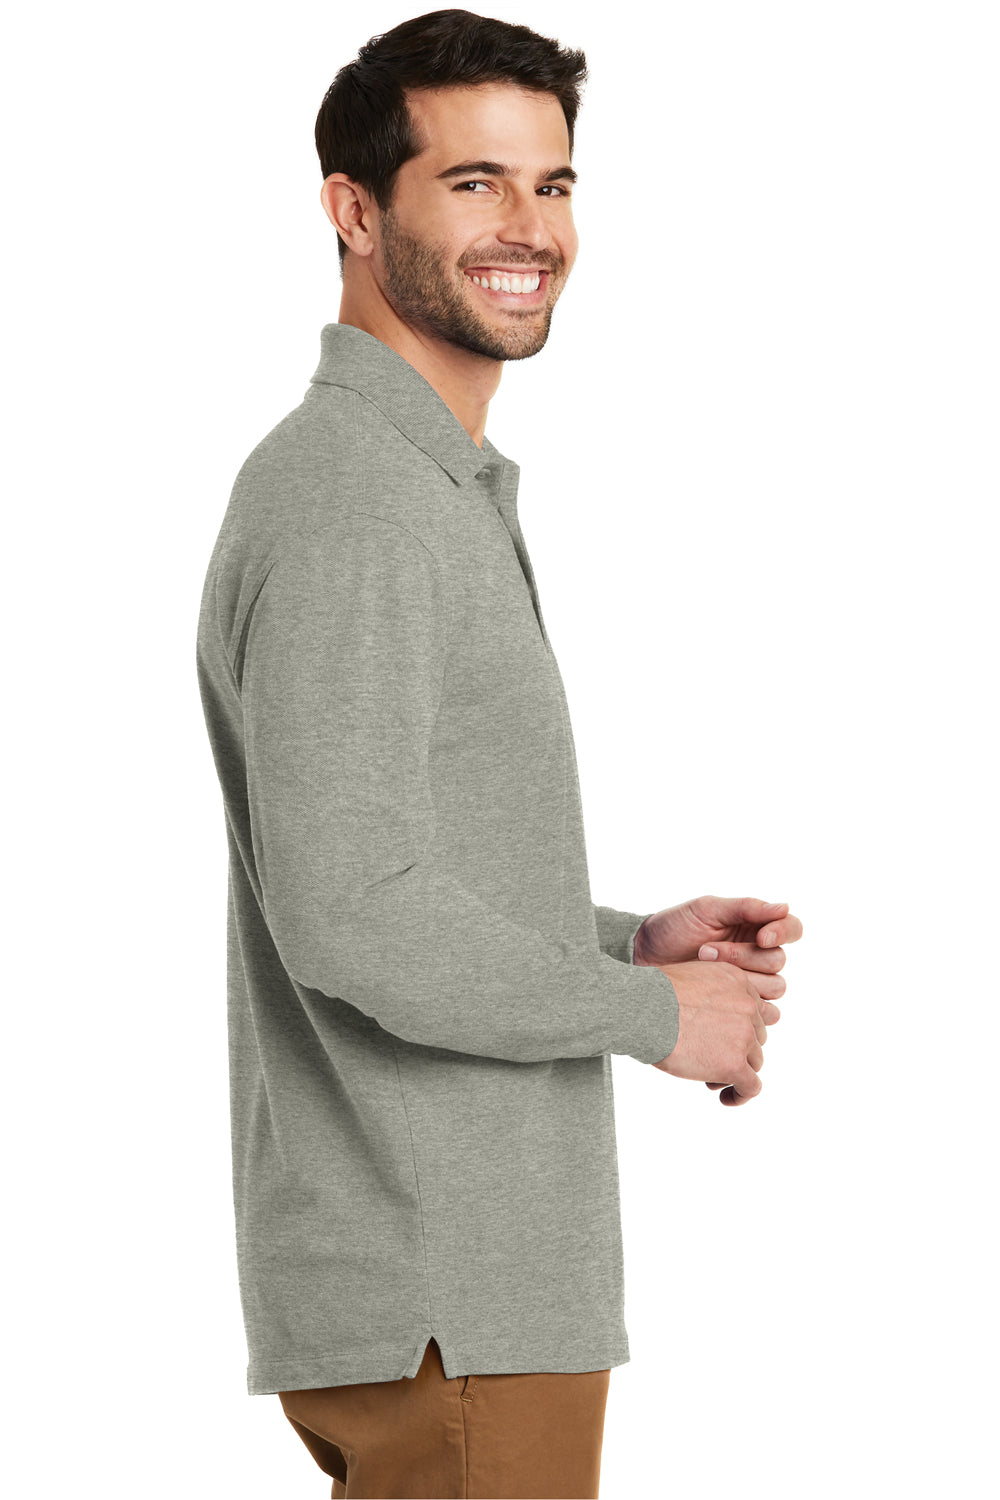 Port Authority K8000LS Mens Wrinkle Resistant Long Sleeve Polo Shirt Heather Oxford Grey Side